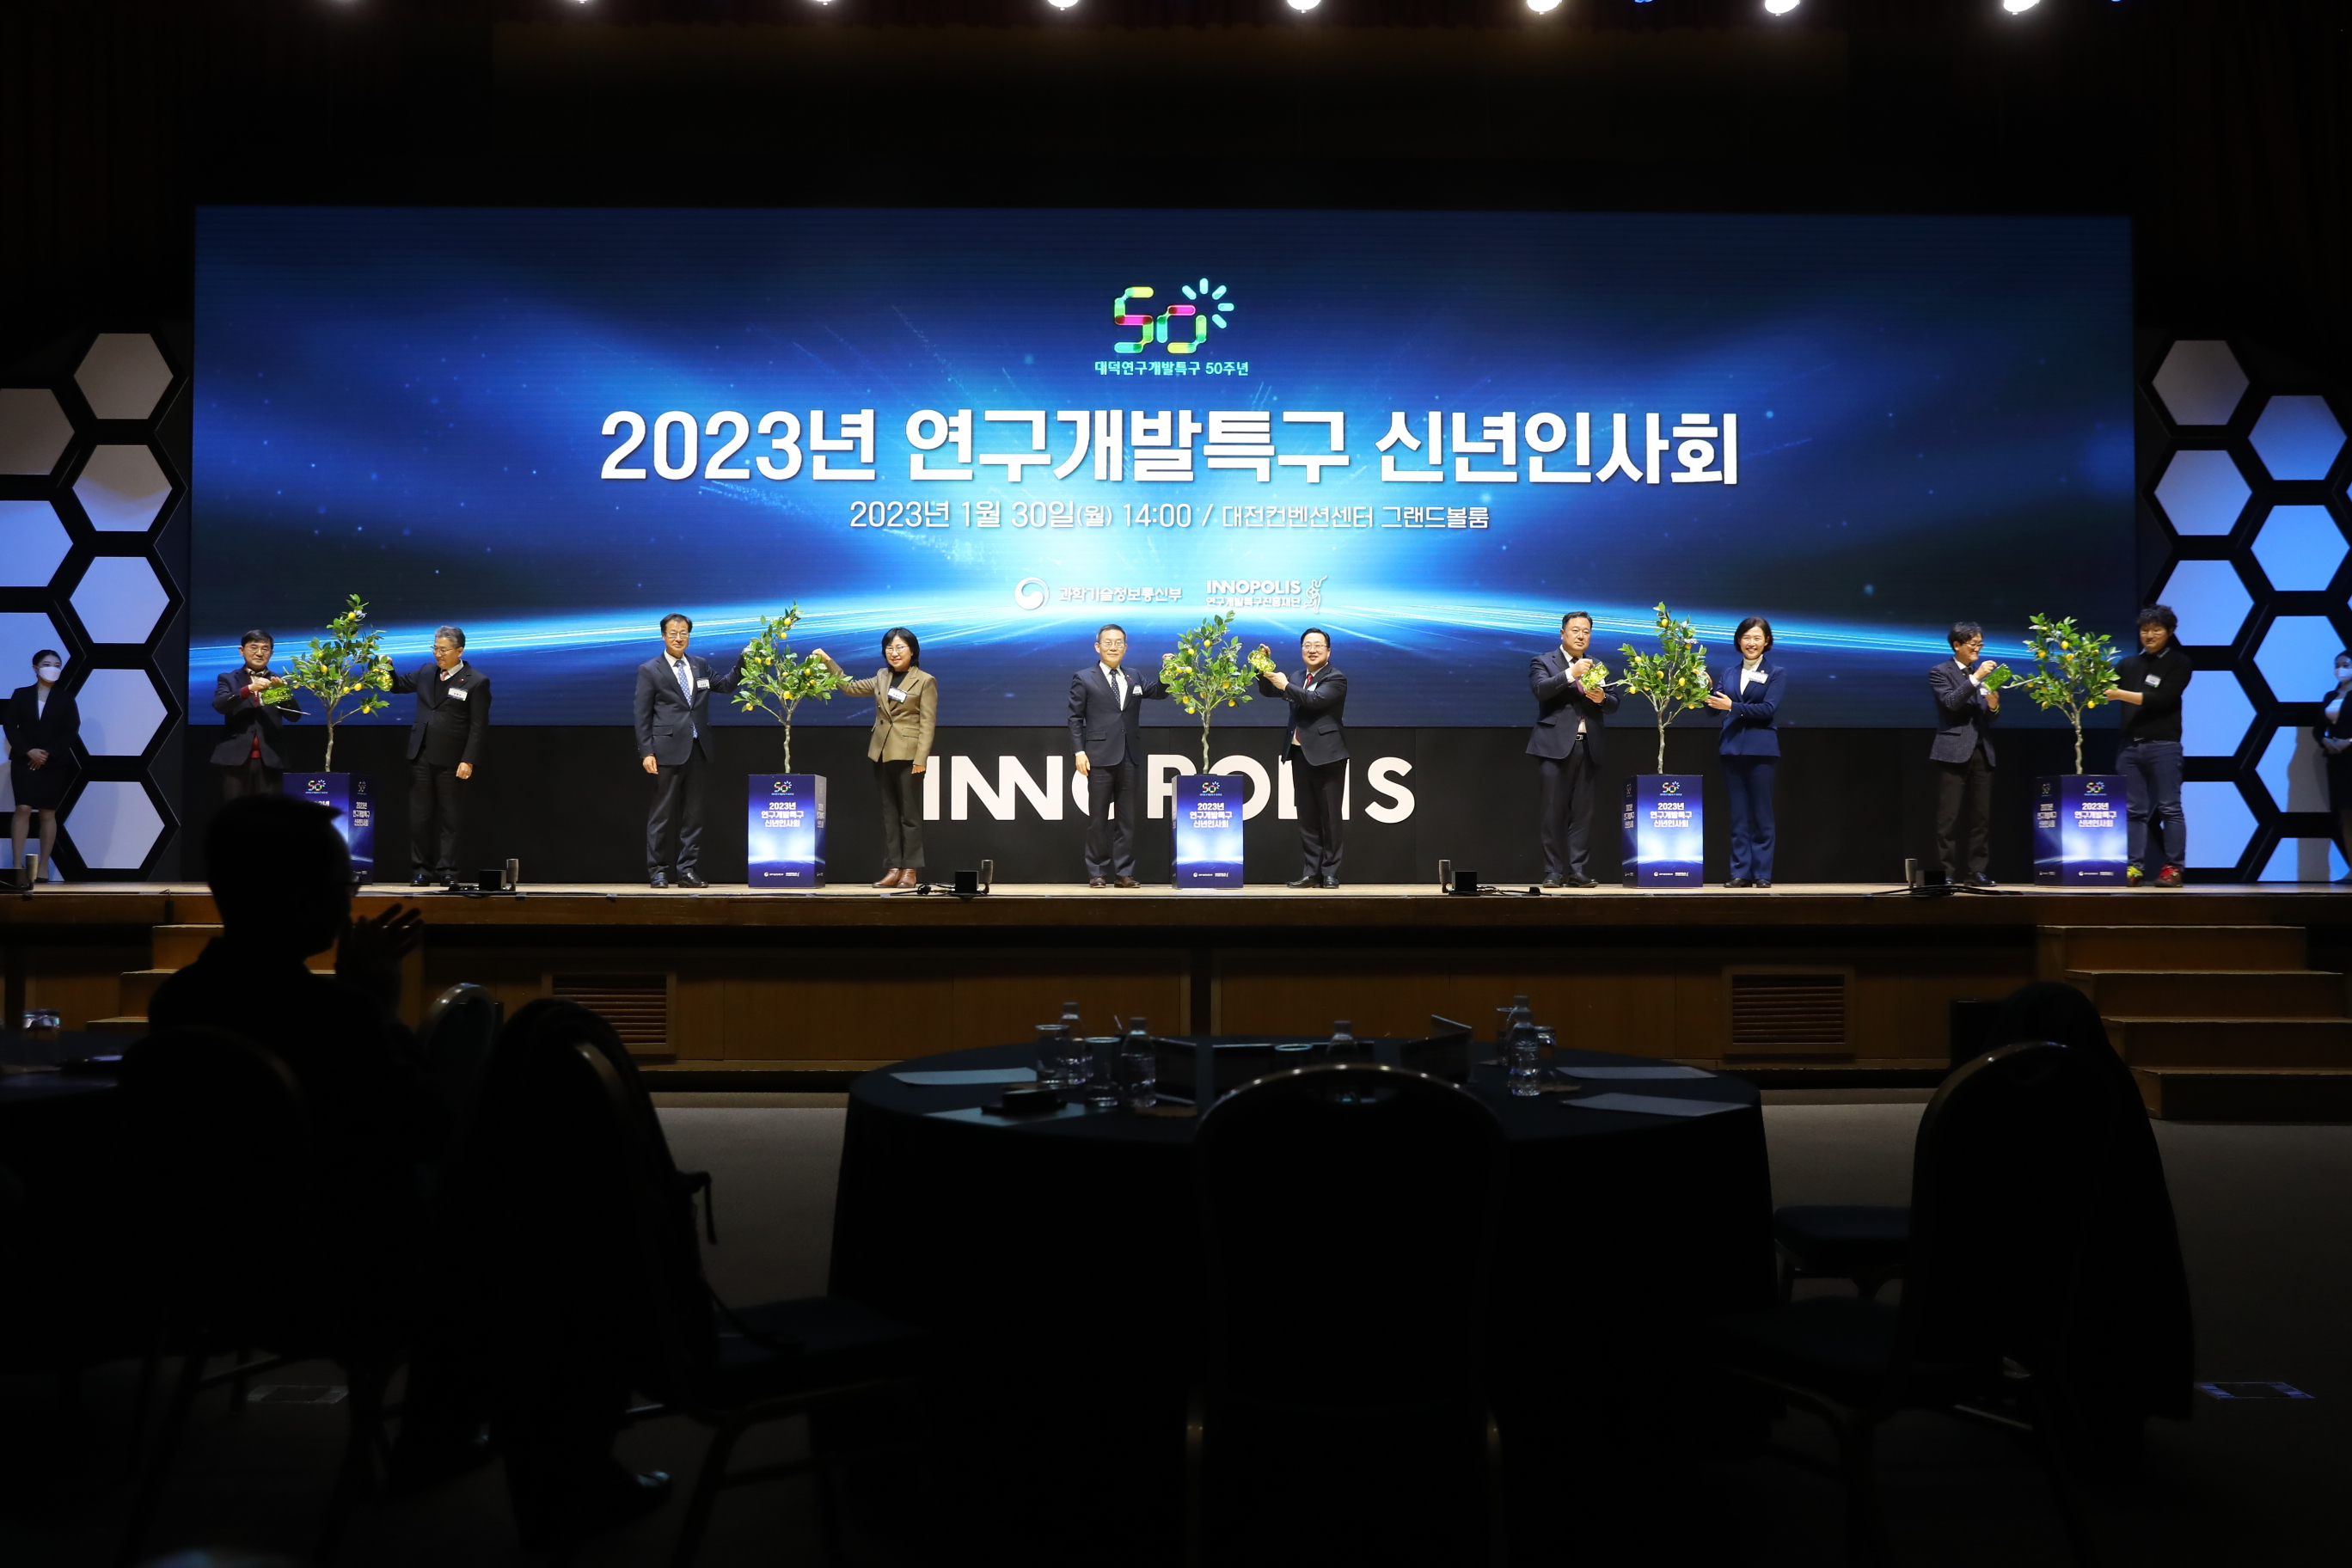 Minister Lee Jong-Ho attended the 2023 INNOPOLIS's New Year's Greetings